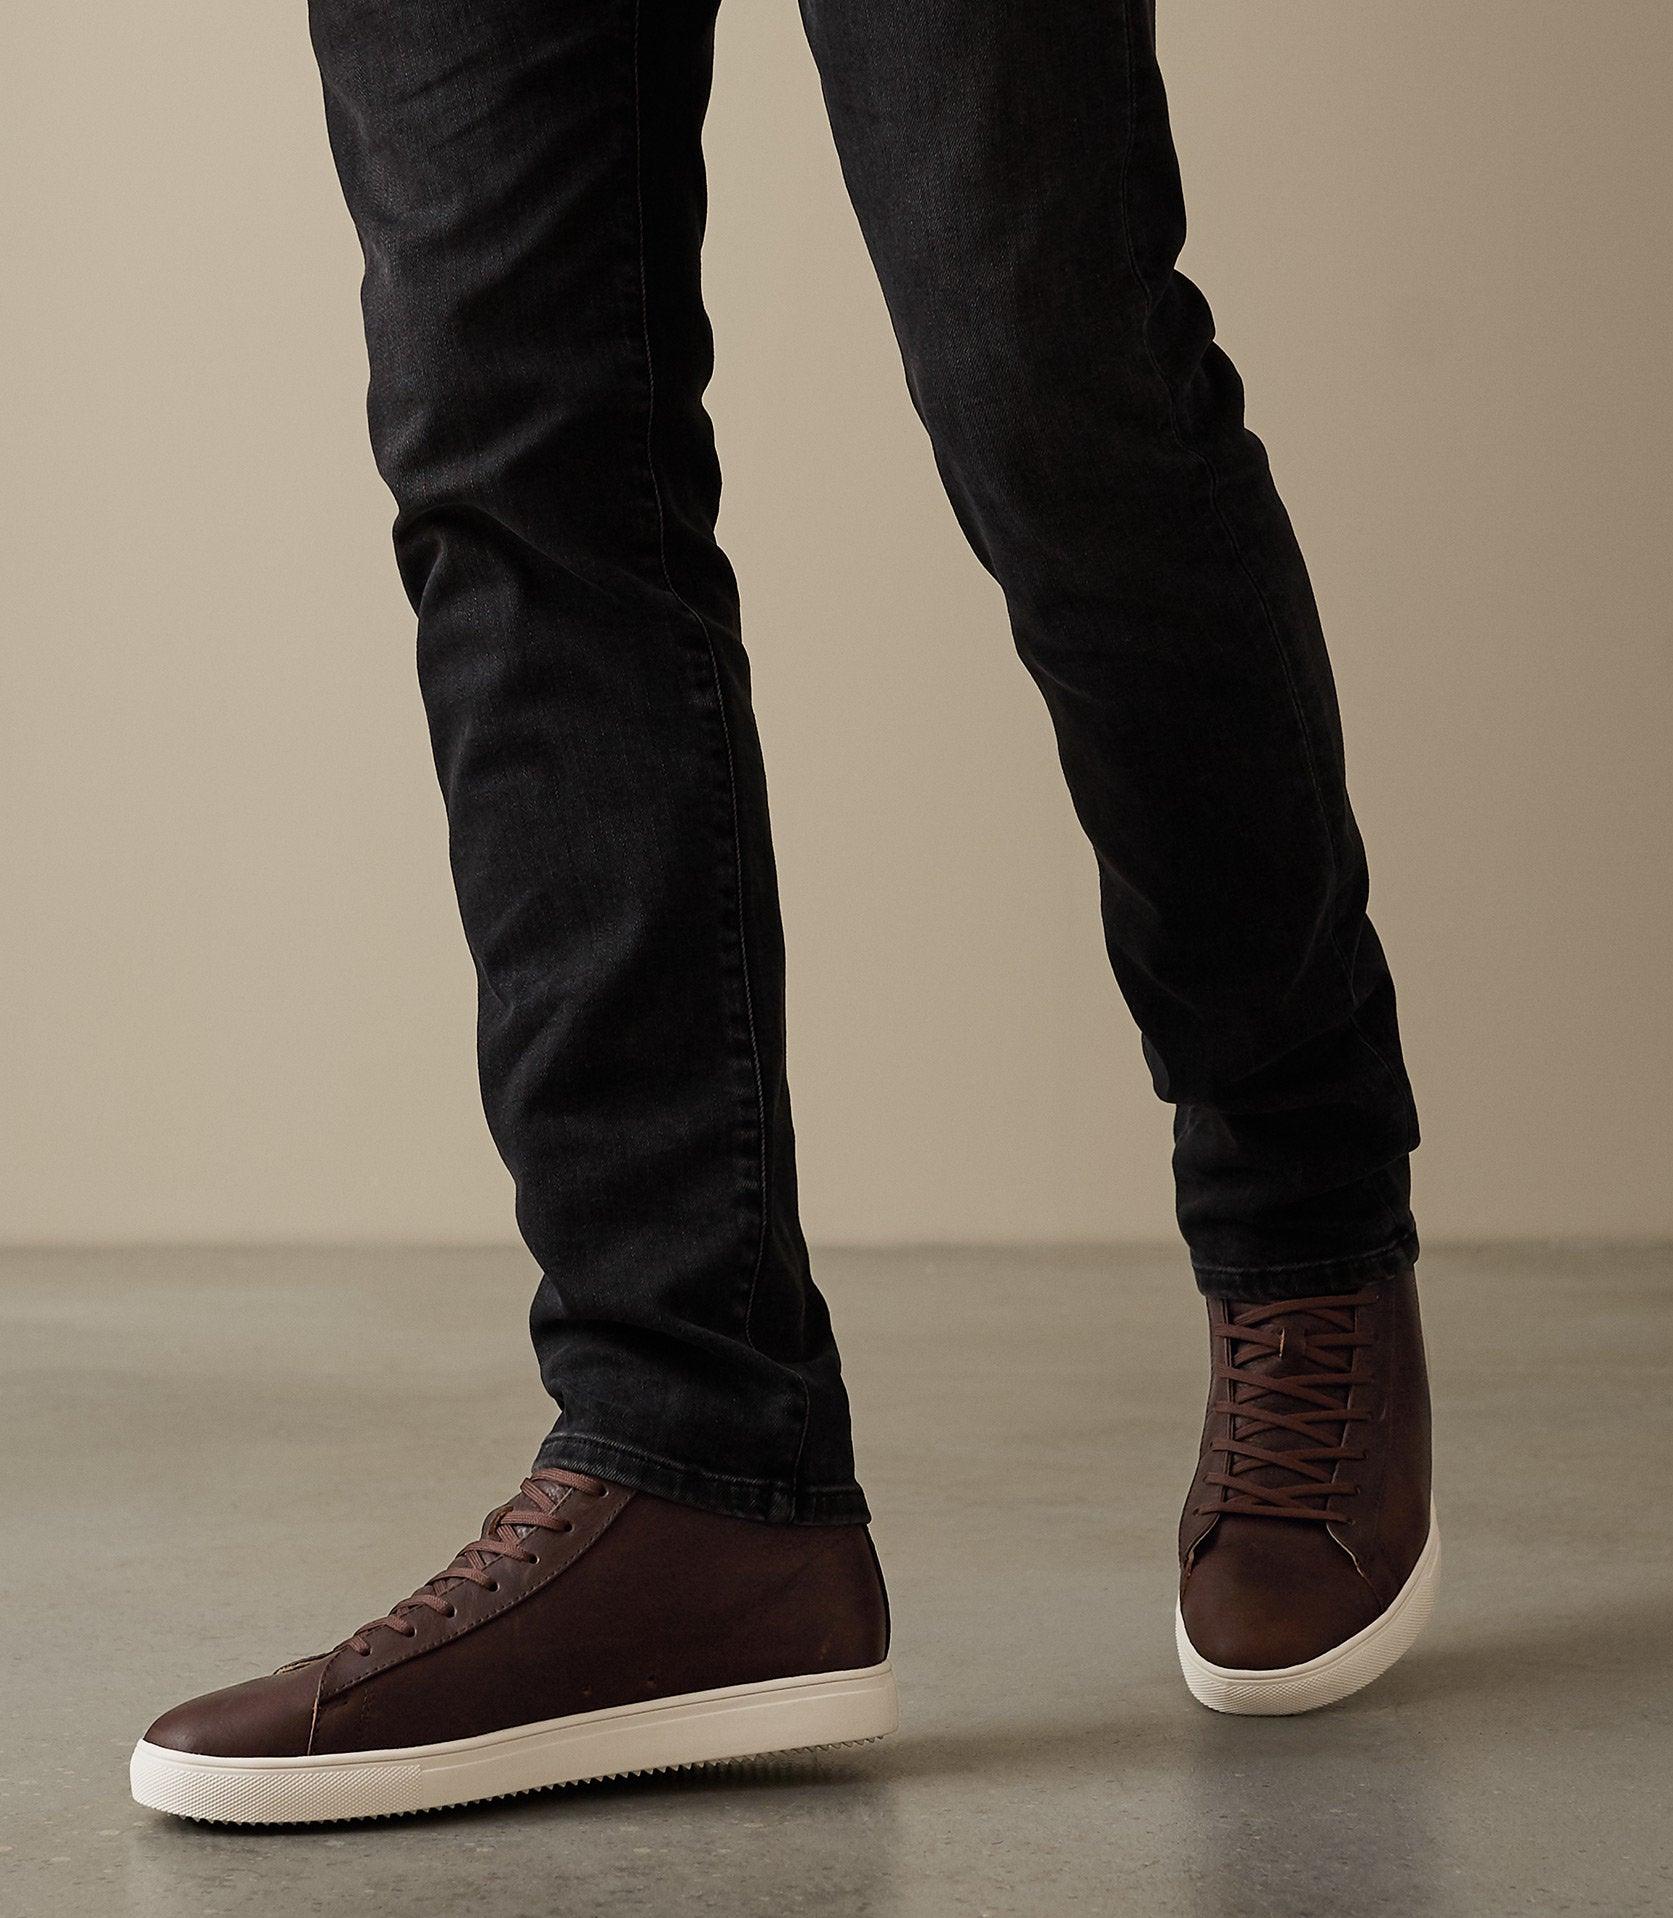 Reiss Clae Mid Top Leather Sneakers in Brown for Men - Lyst